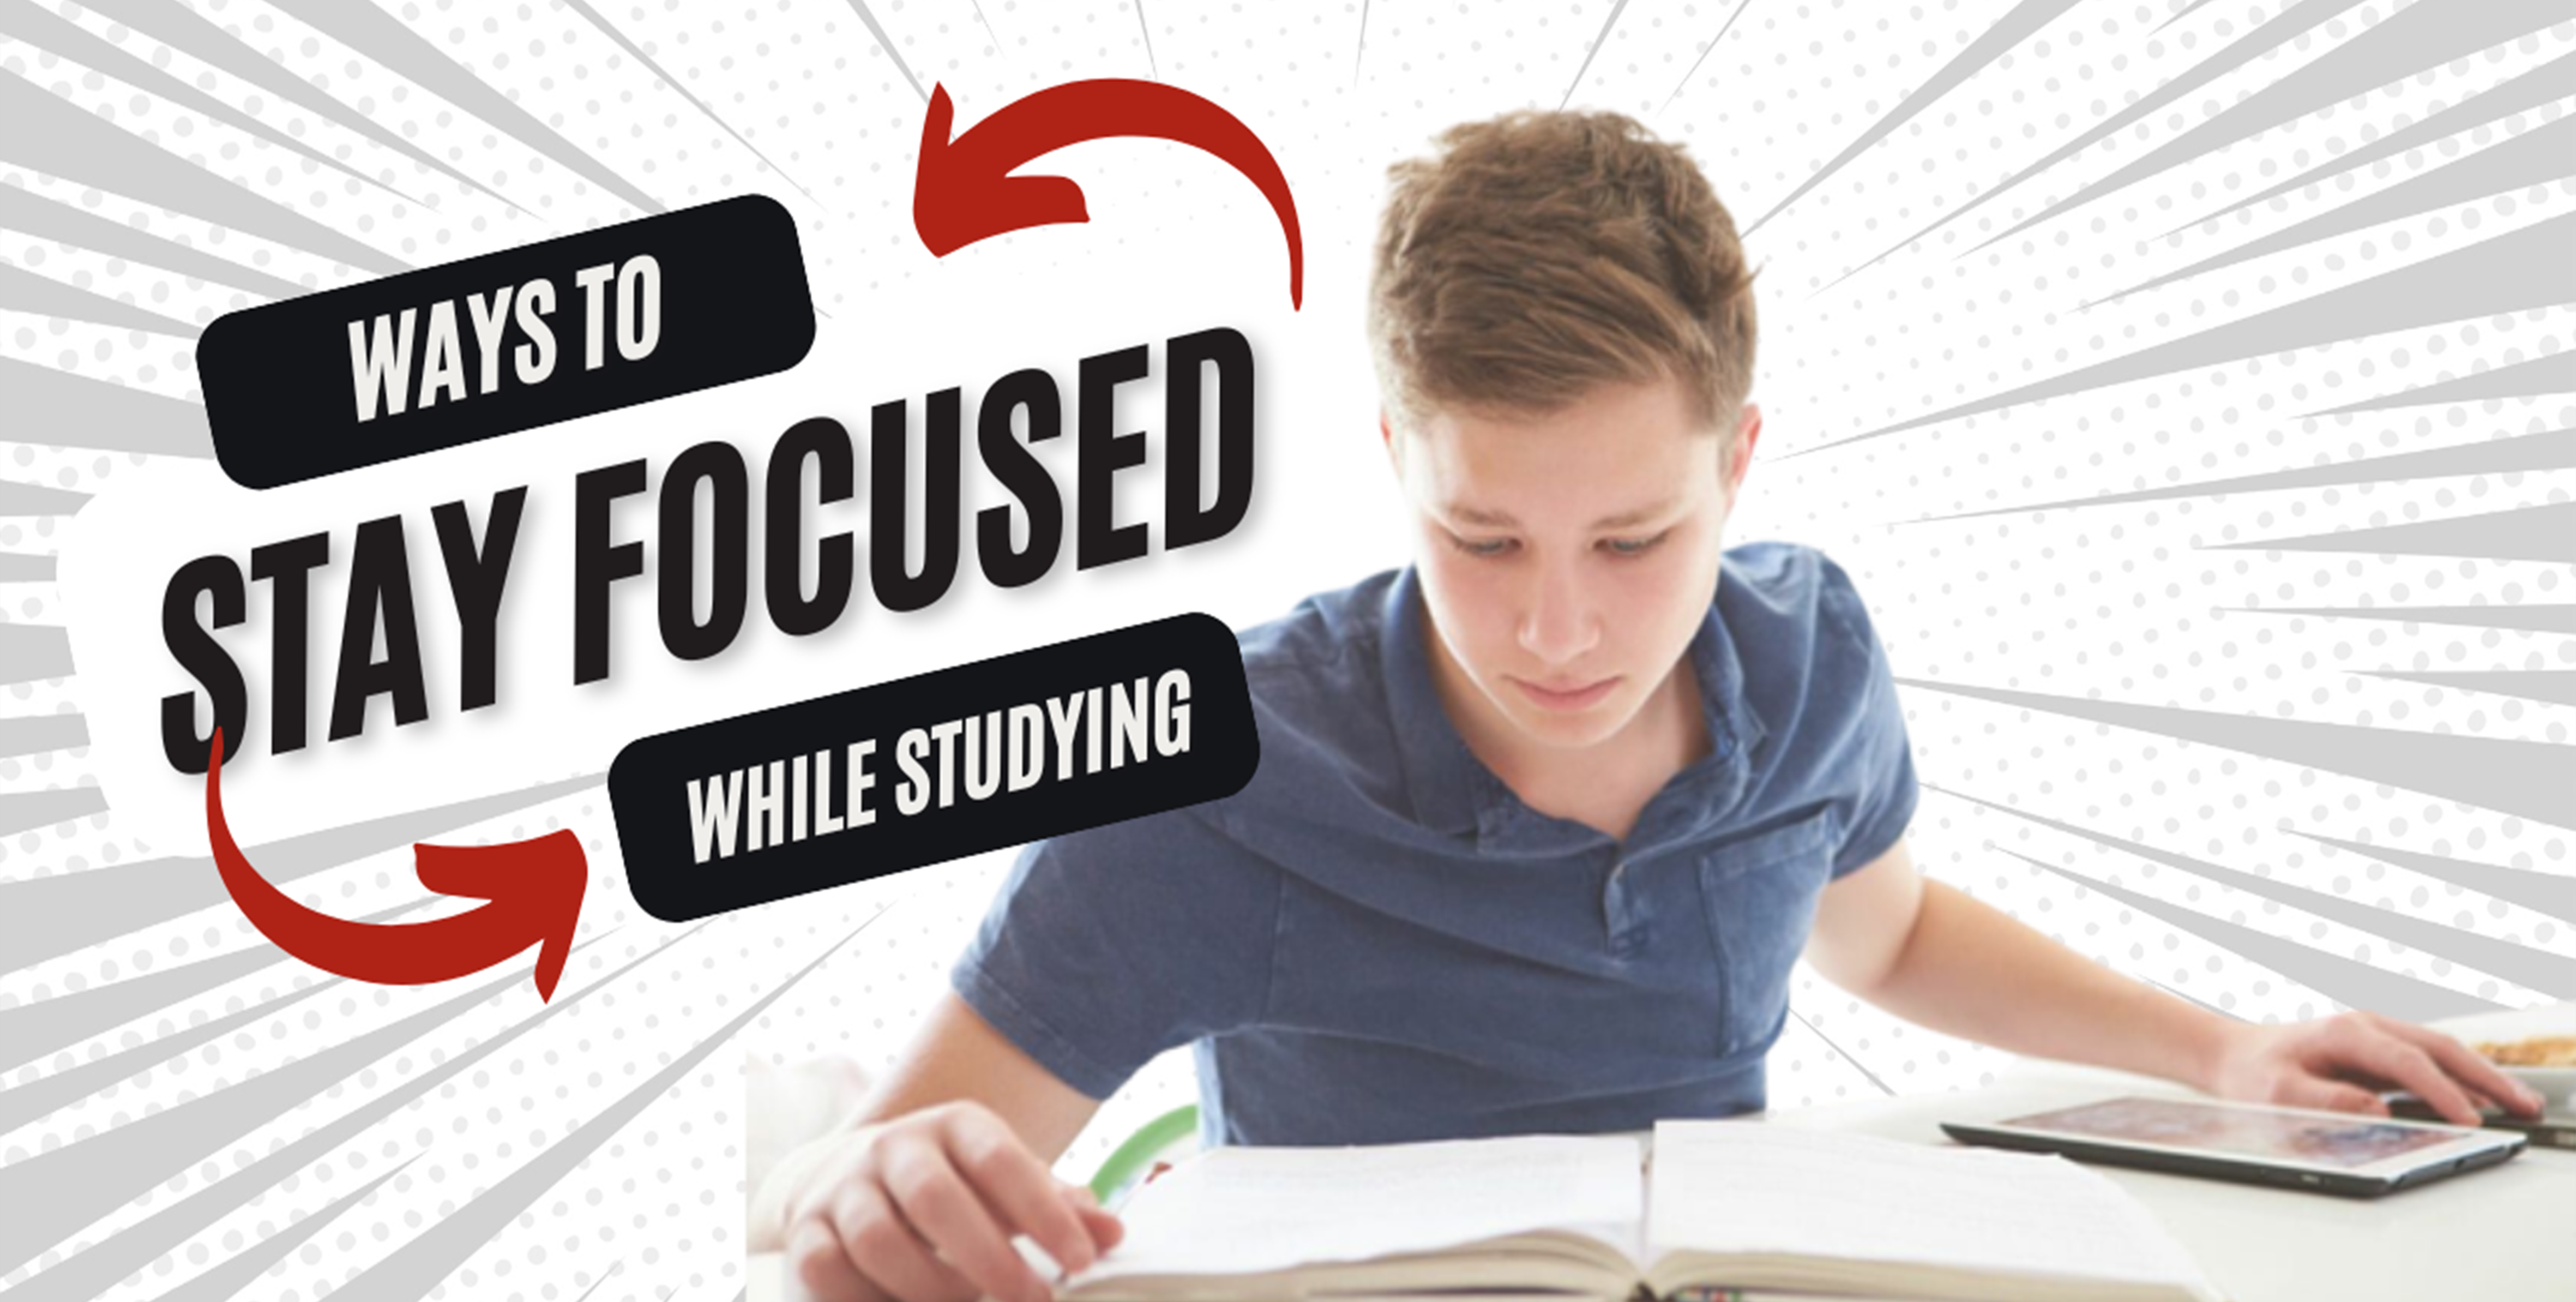 Ways to Stay Focused While Studying